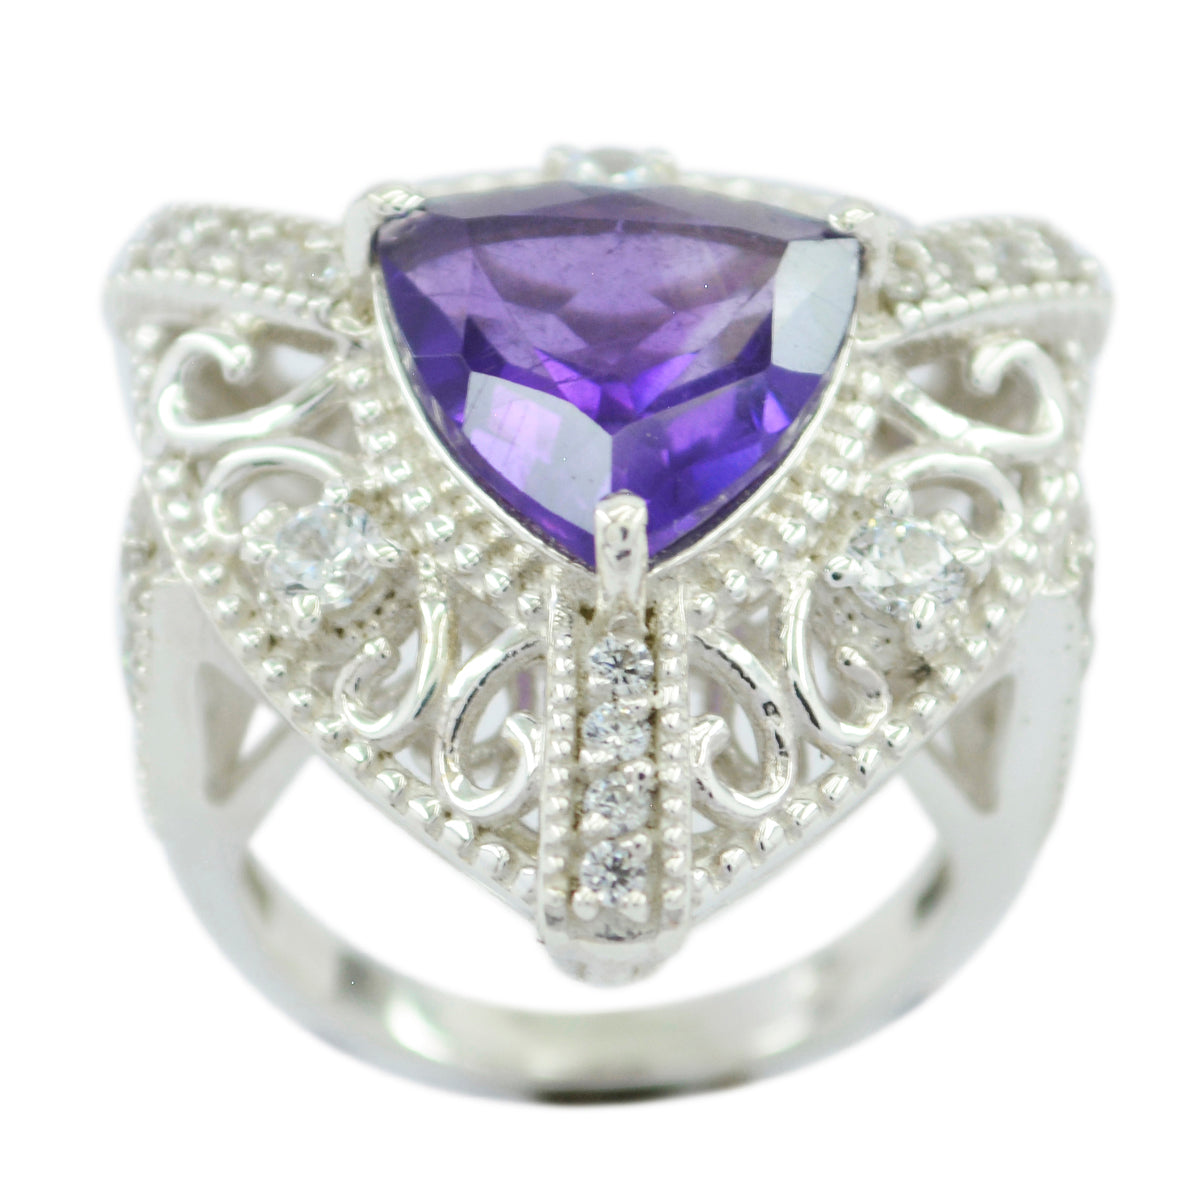 Wholesale Stone Amethyst 925 Sterling Silver Rings Gift For Fathers